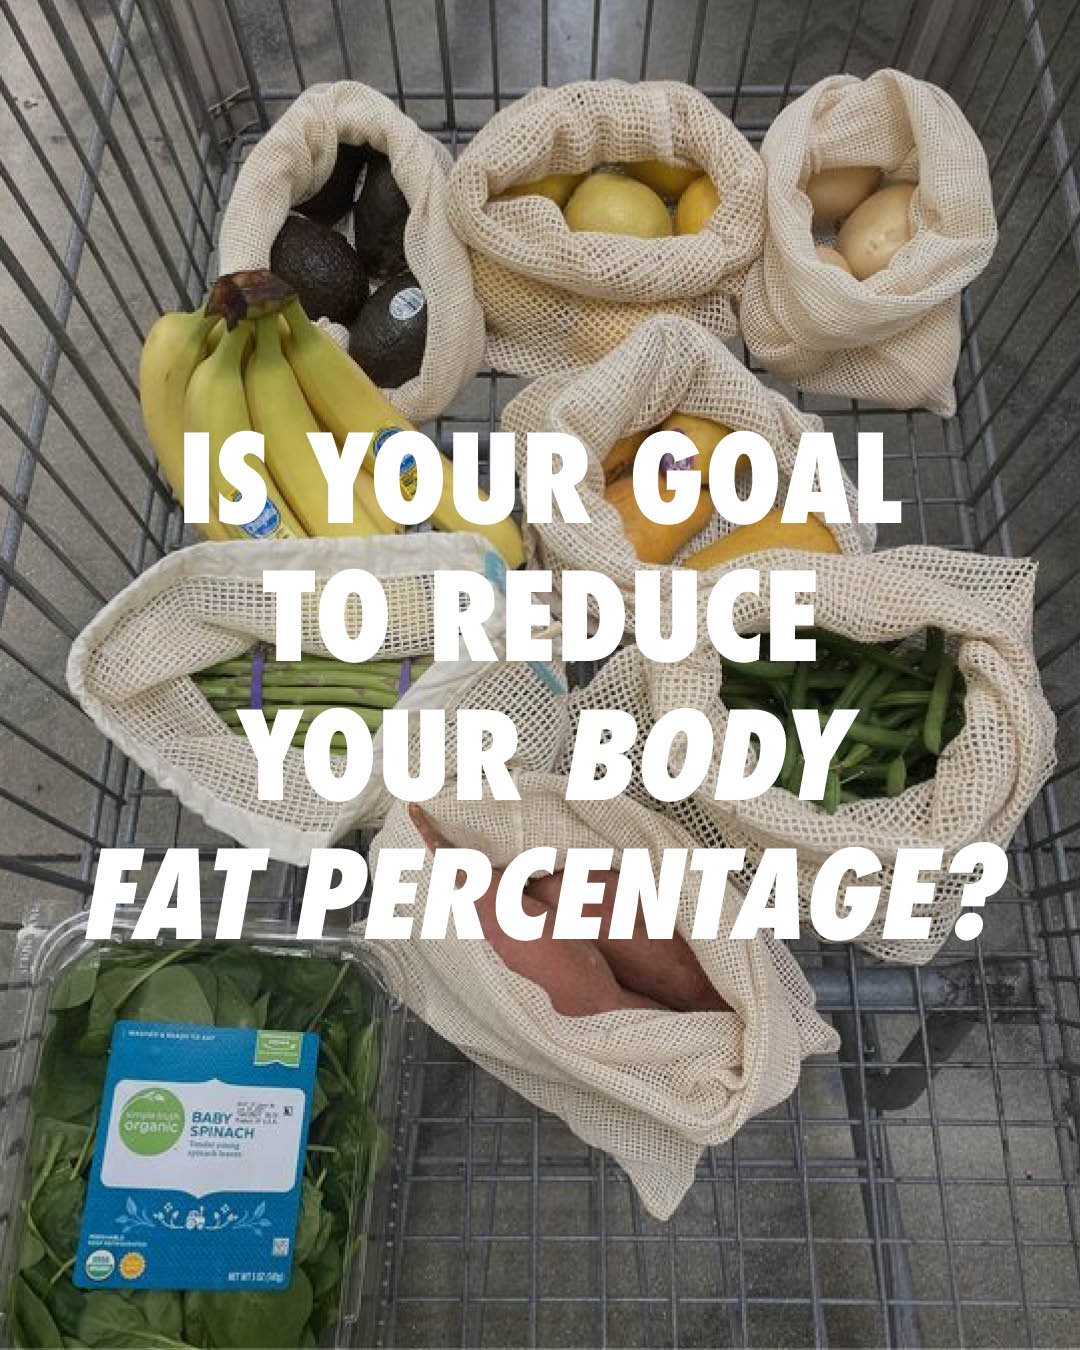 Looking to reduce your BODY FAT PERCENTAGE?